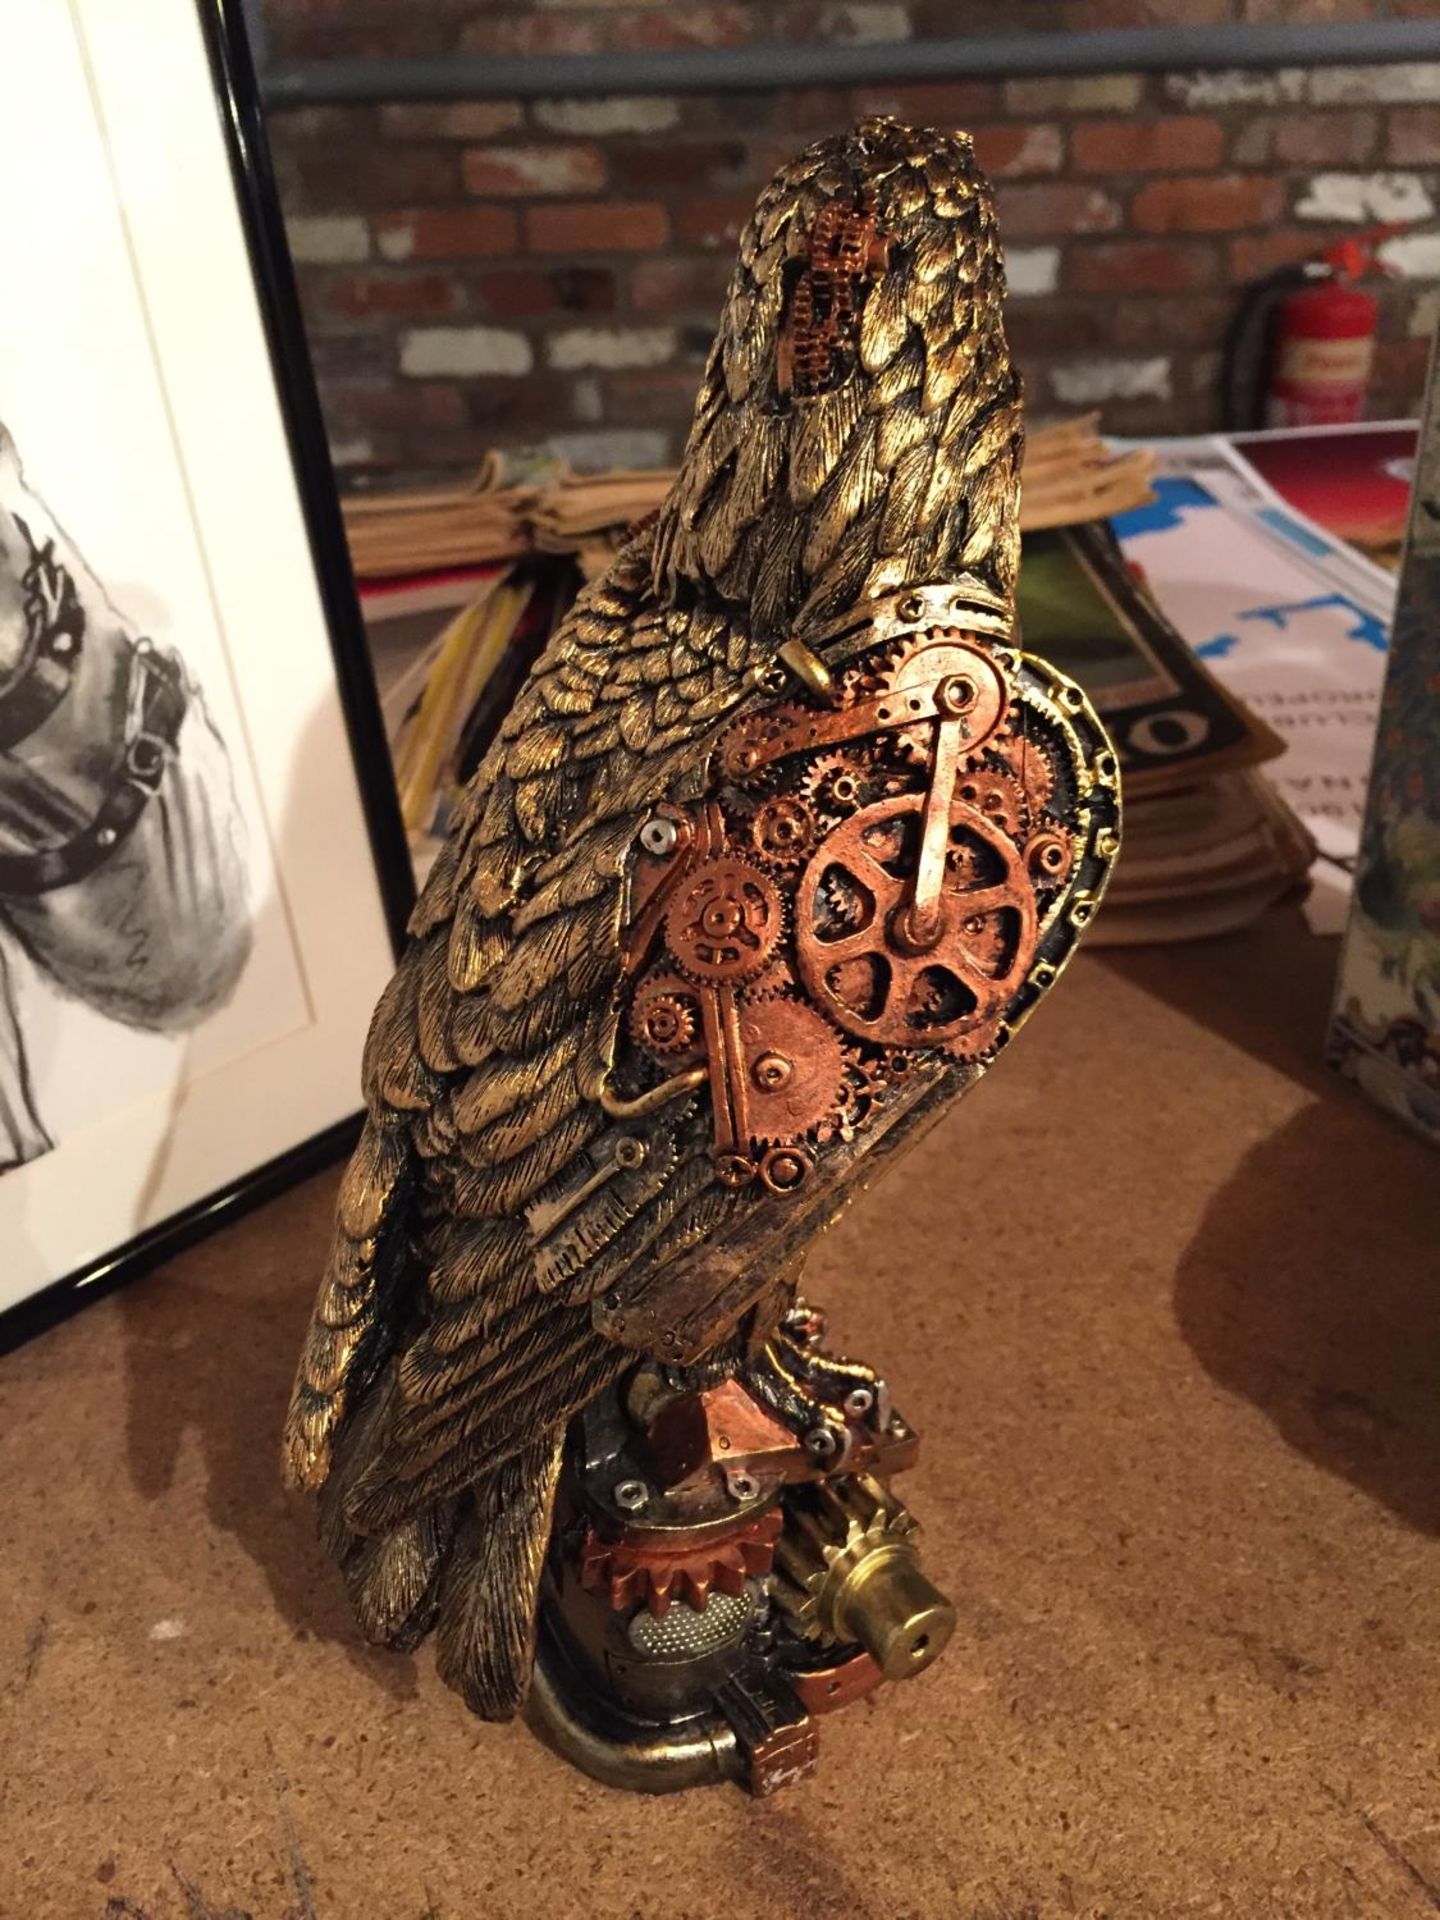 A STEAM PUNK STYLE EAGLE - Image 2 of 3